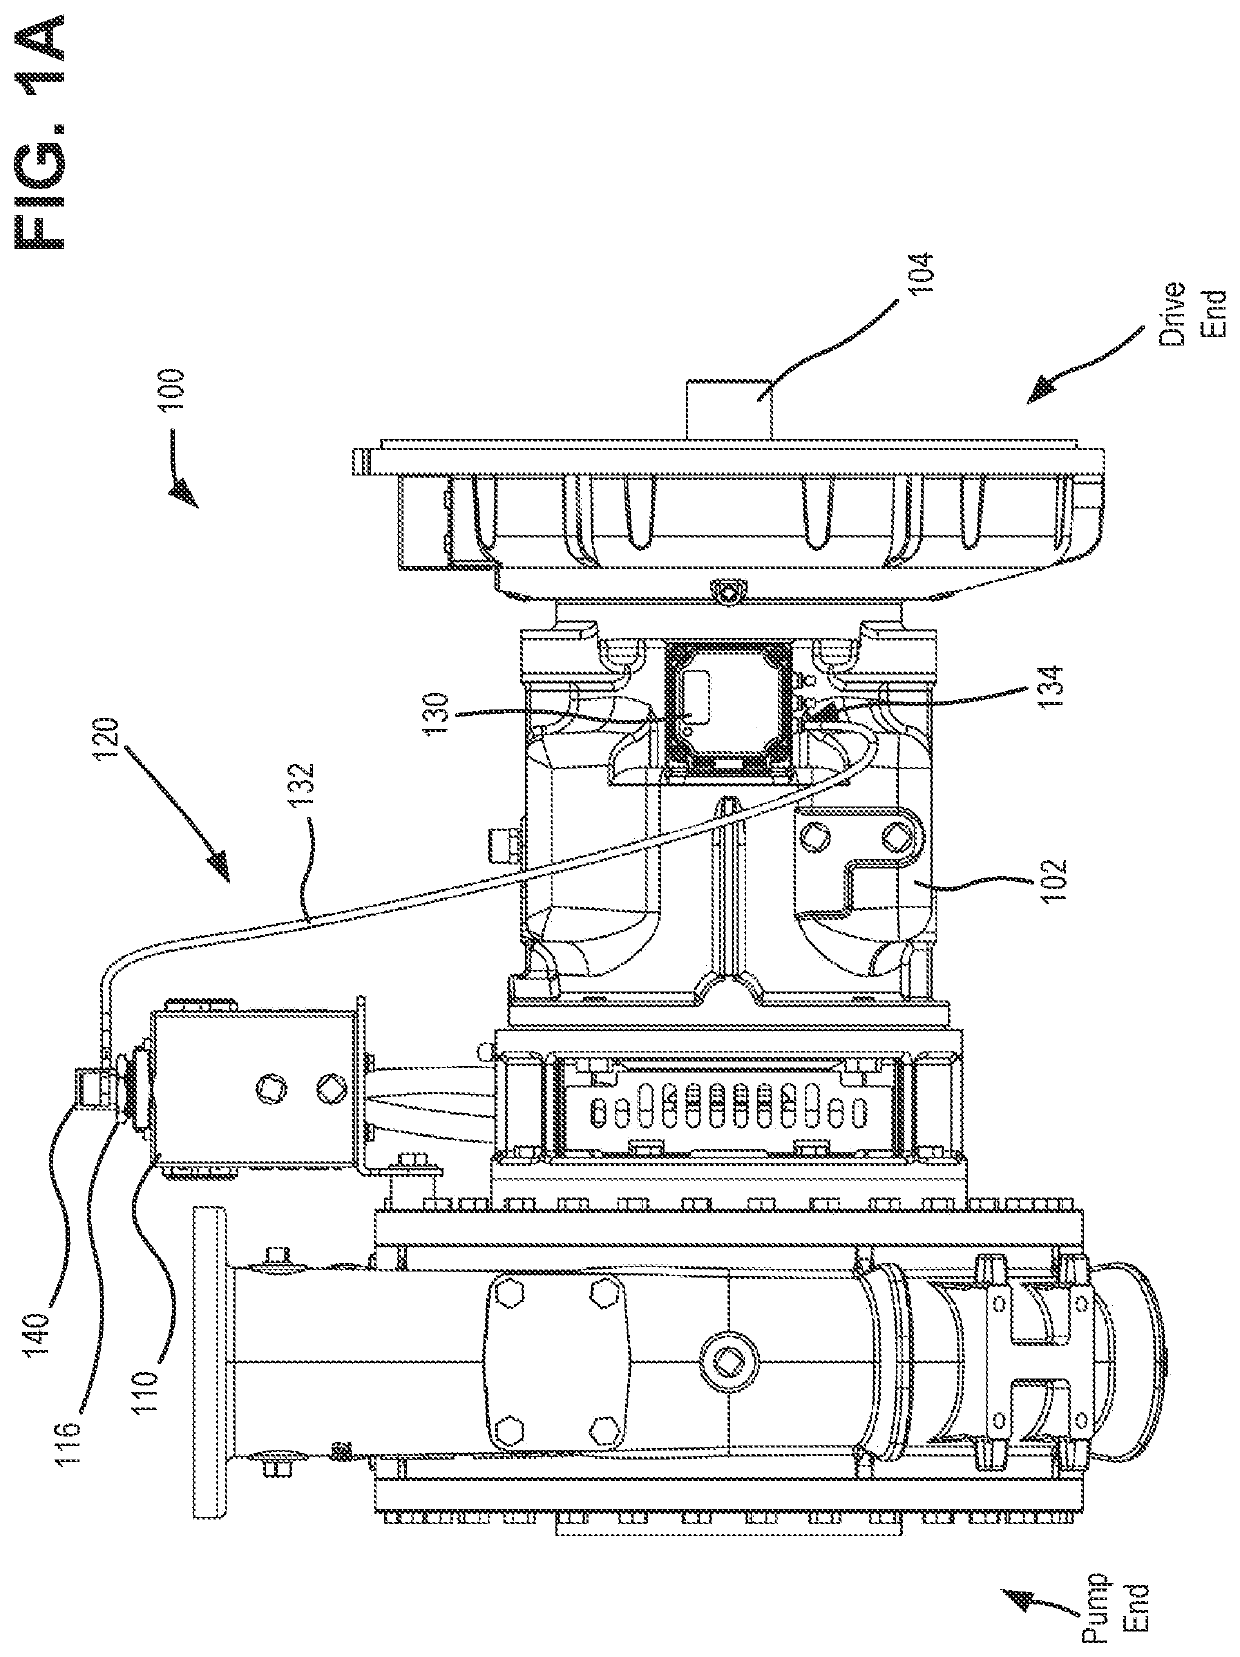 Monitoring system for pump with mechanical seal lubrication arrangement